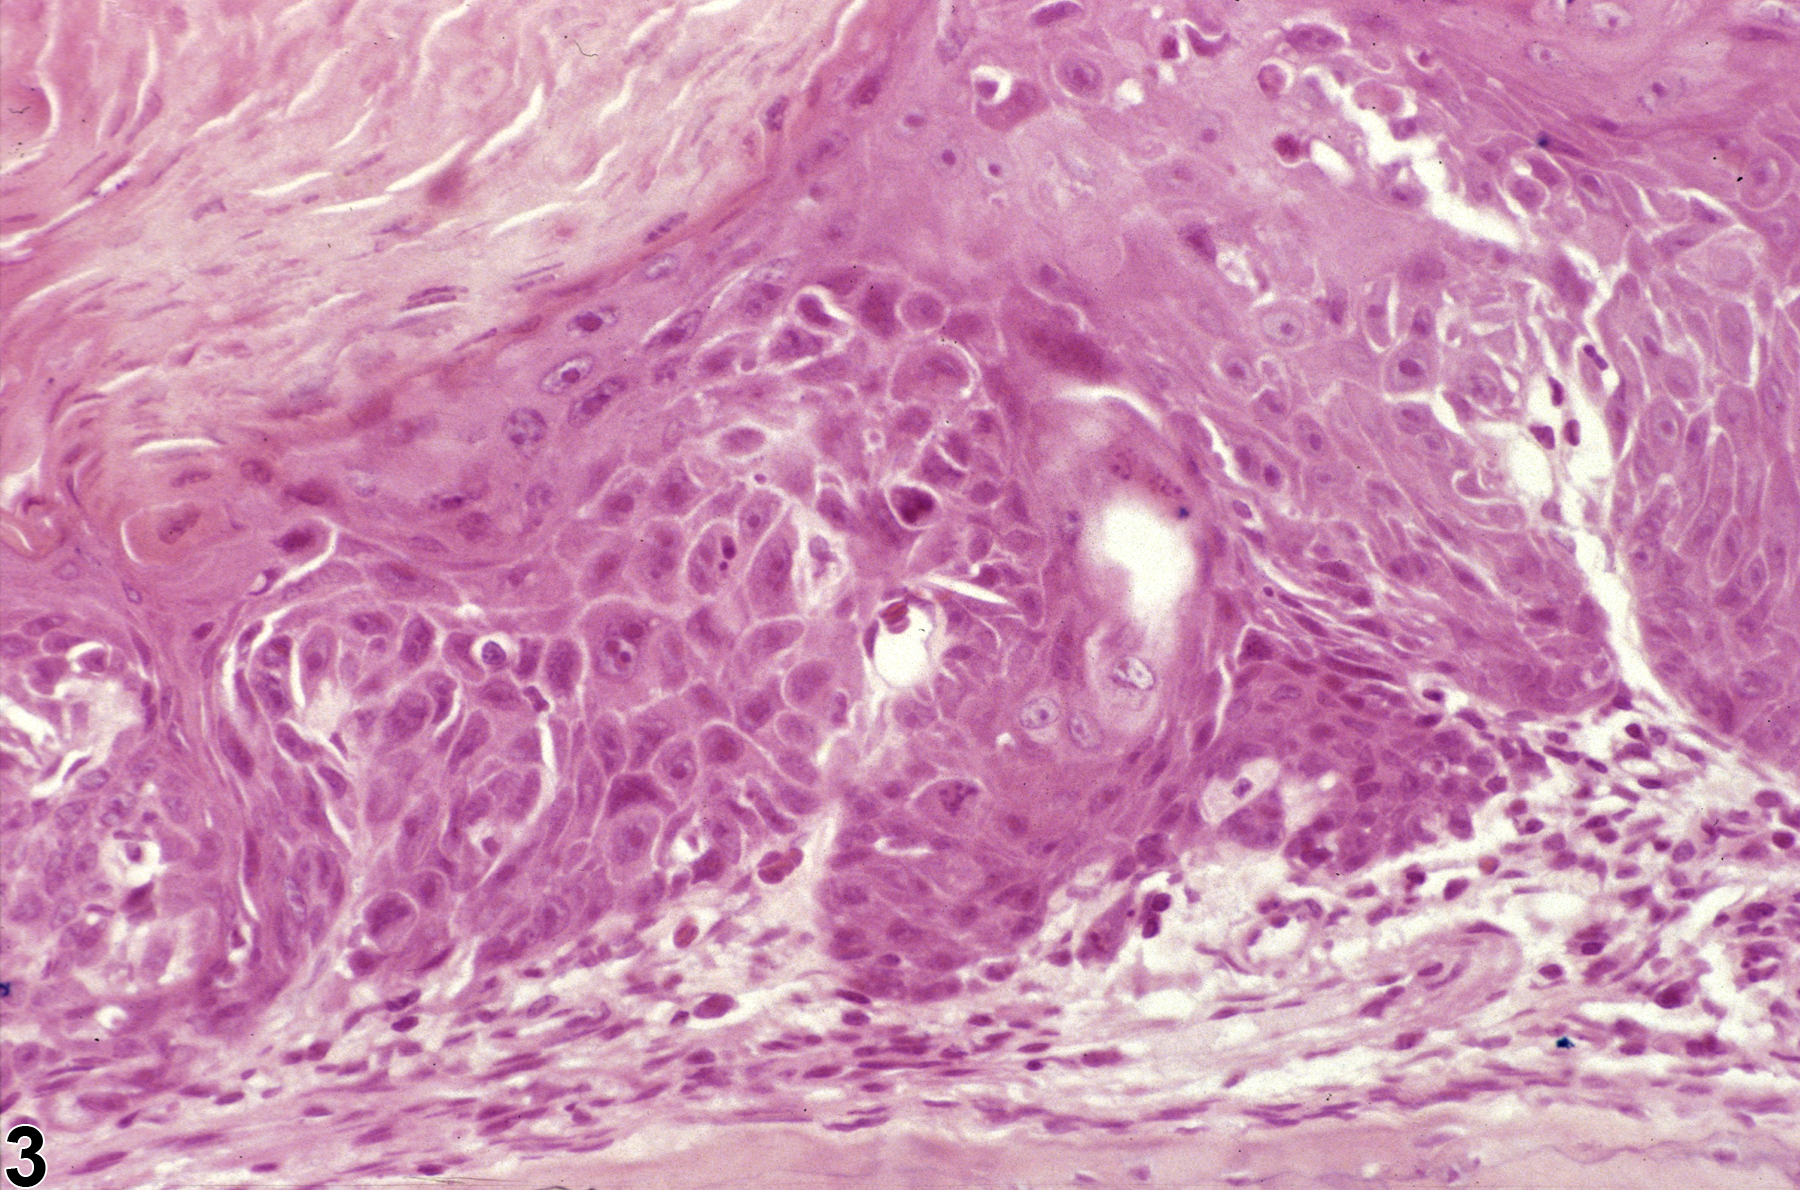 Image of hyperplasia, atypical in the nose, squamous epithelium from a female Osborne Mendel rat in a chronic study